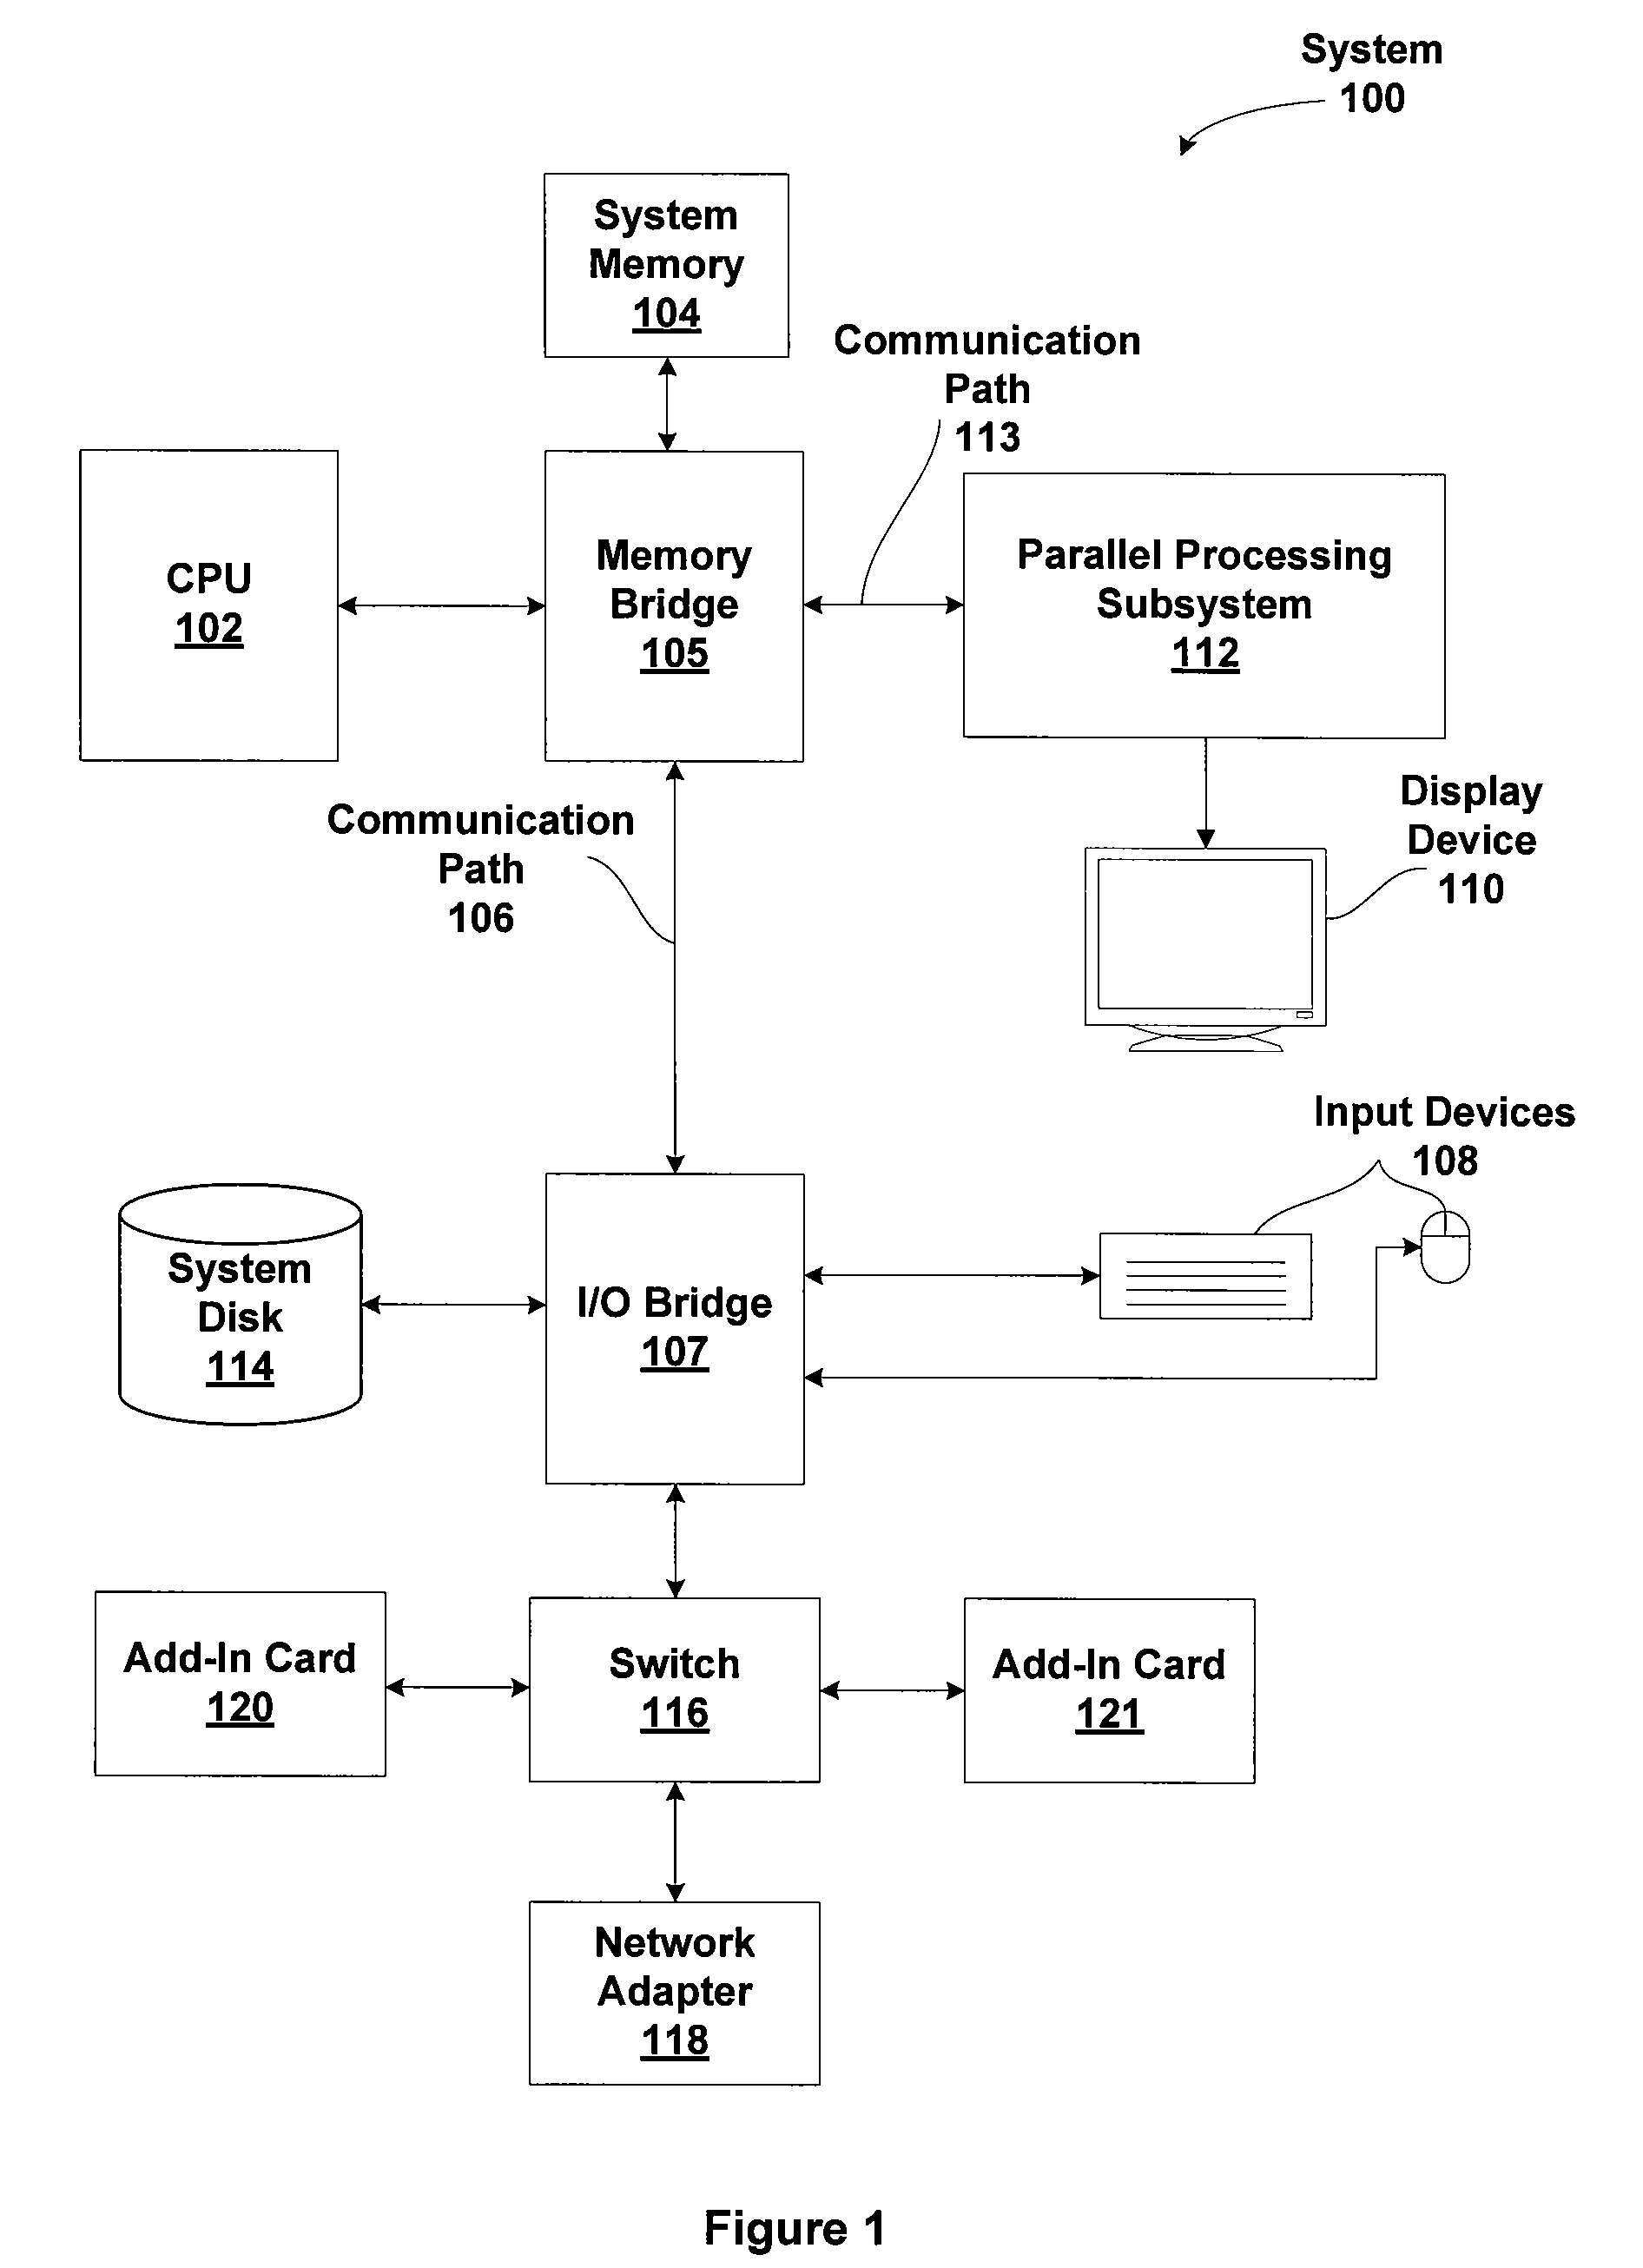 Indirect Function Call Instructions in a Synchronous Parallel Thread Processor